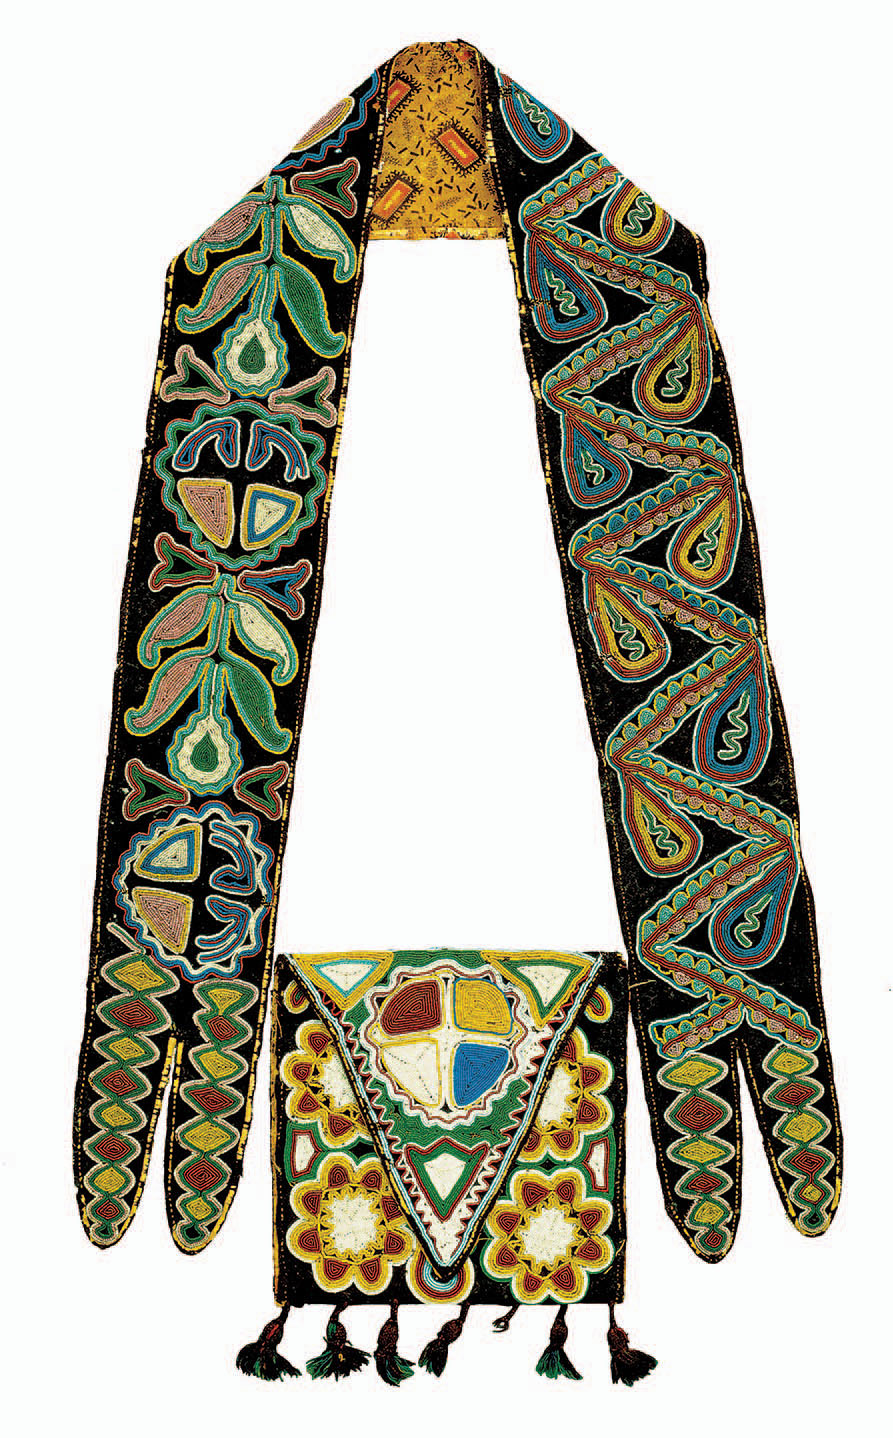 Creek man’s shoulder bag ca. 1810 – 30. Wool, cotton, silk ribbon, glass beads, 25¾ inches. The Detroit Institute of Arts, Founder’s Society, DTR 781294. Purchased with funds from the Flint Ink Corporation, 1988.29. Photography: The Detroit Institute of Arts